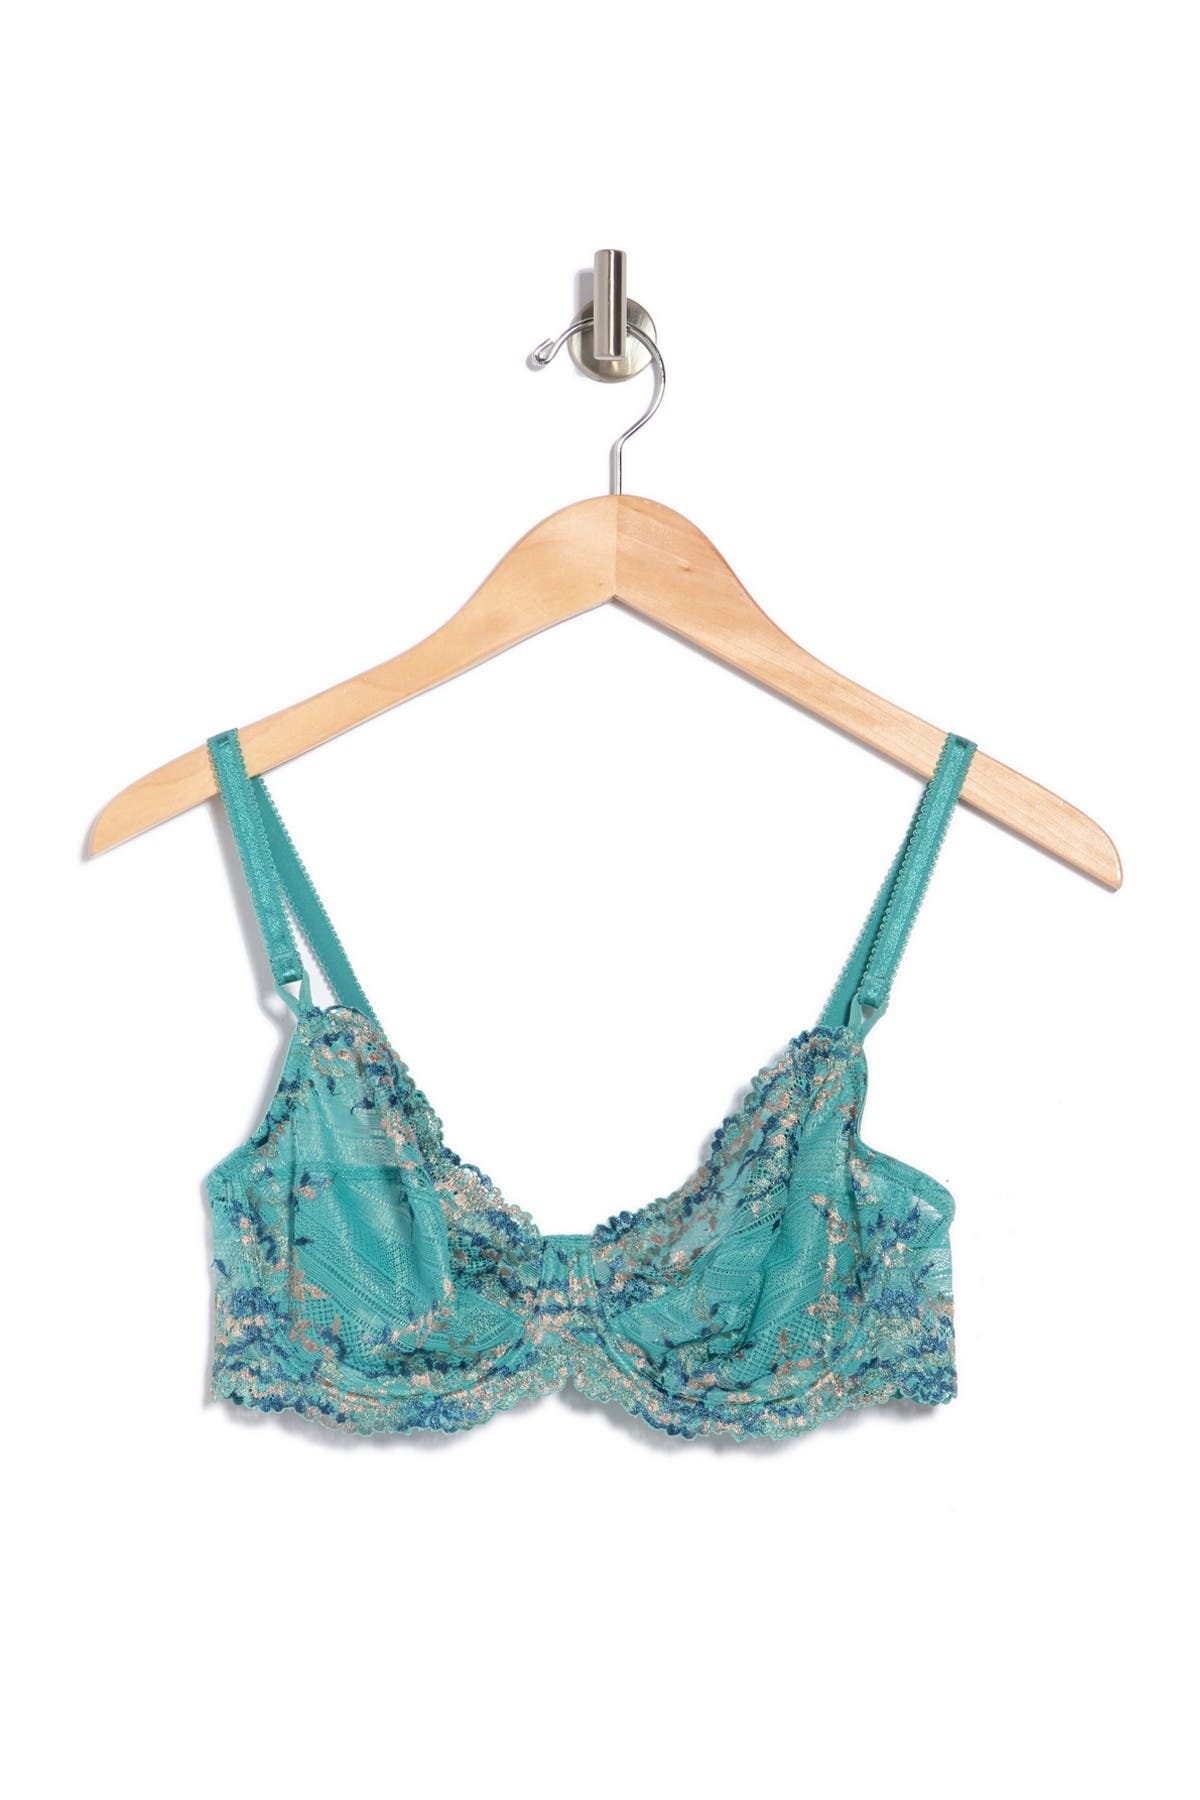 Wacoal Embrace Lace Pieces in Stunning Bristol Blue